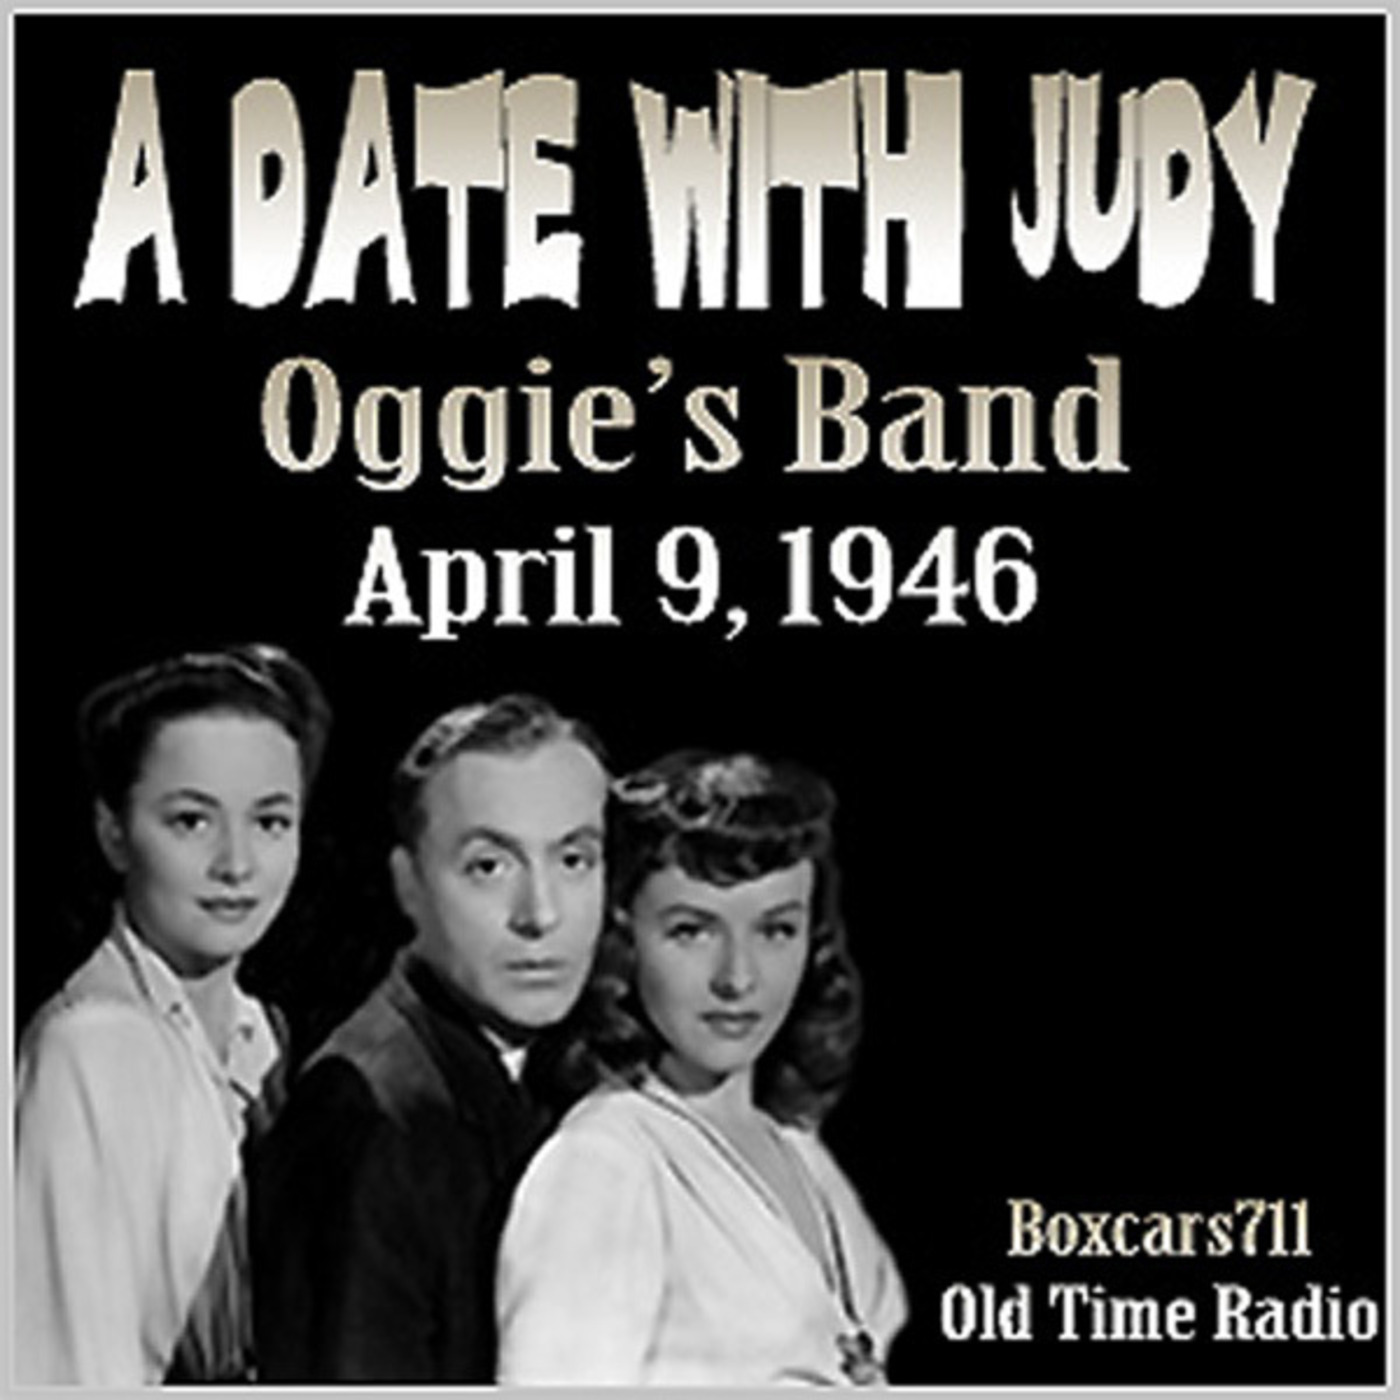 Episode 9685: A Date With Judy - 